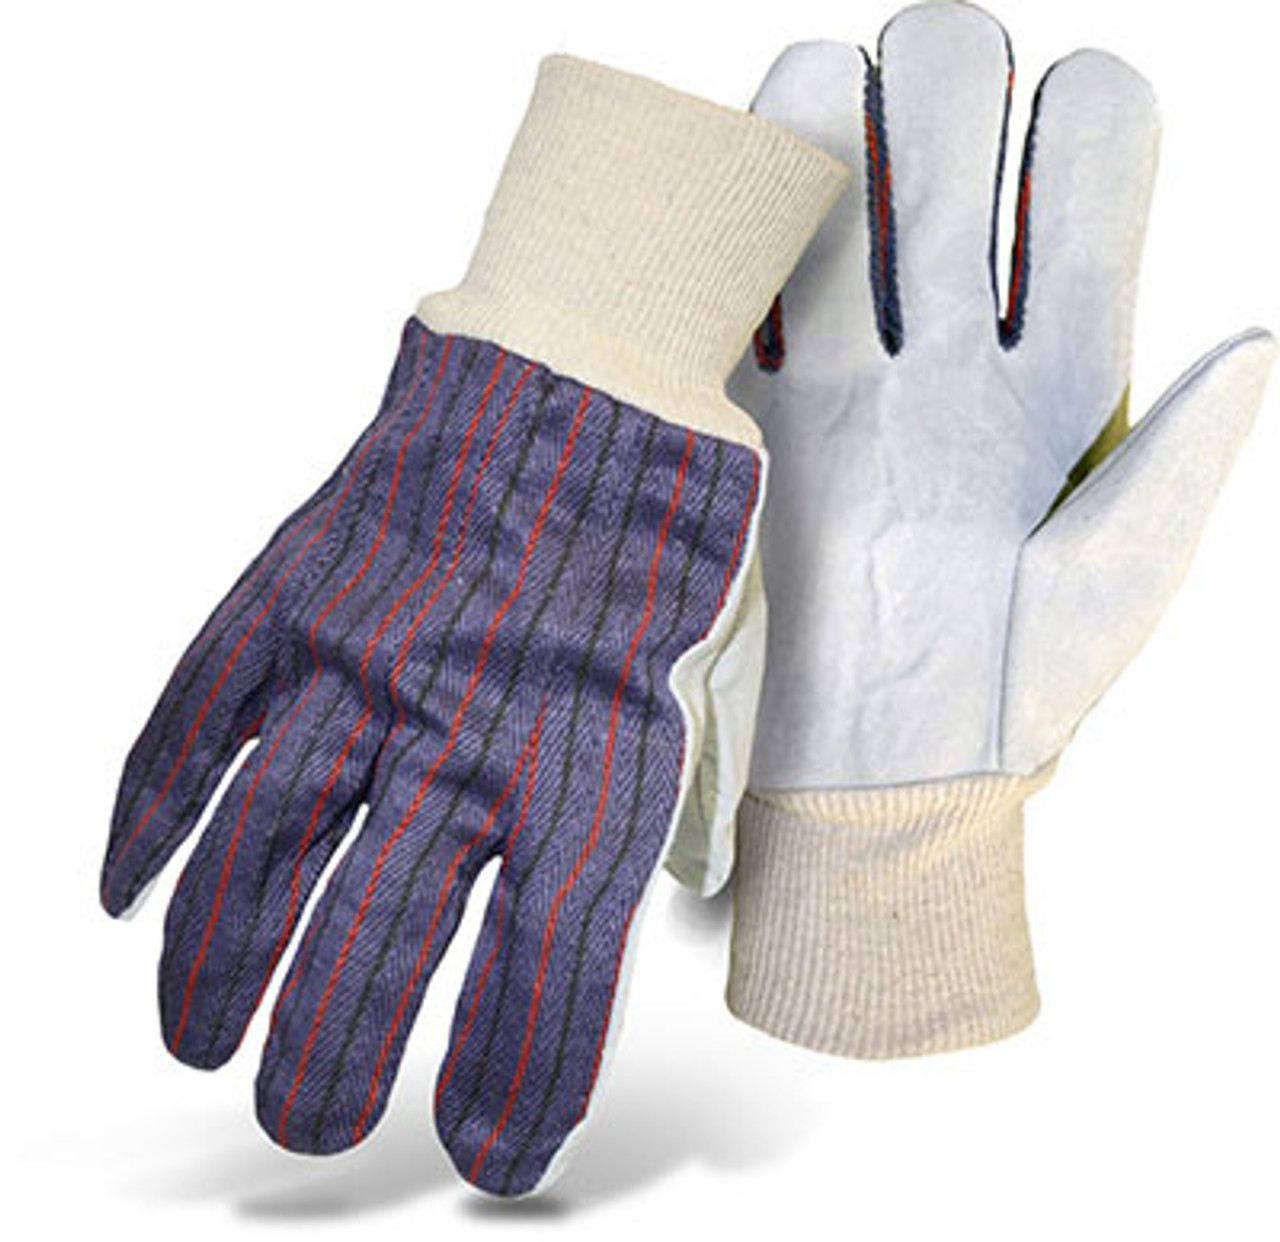 Leather Palm Work Gloves Canvas Back Large